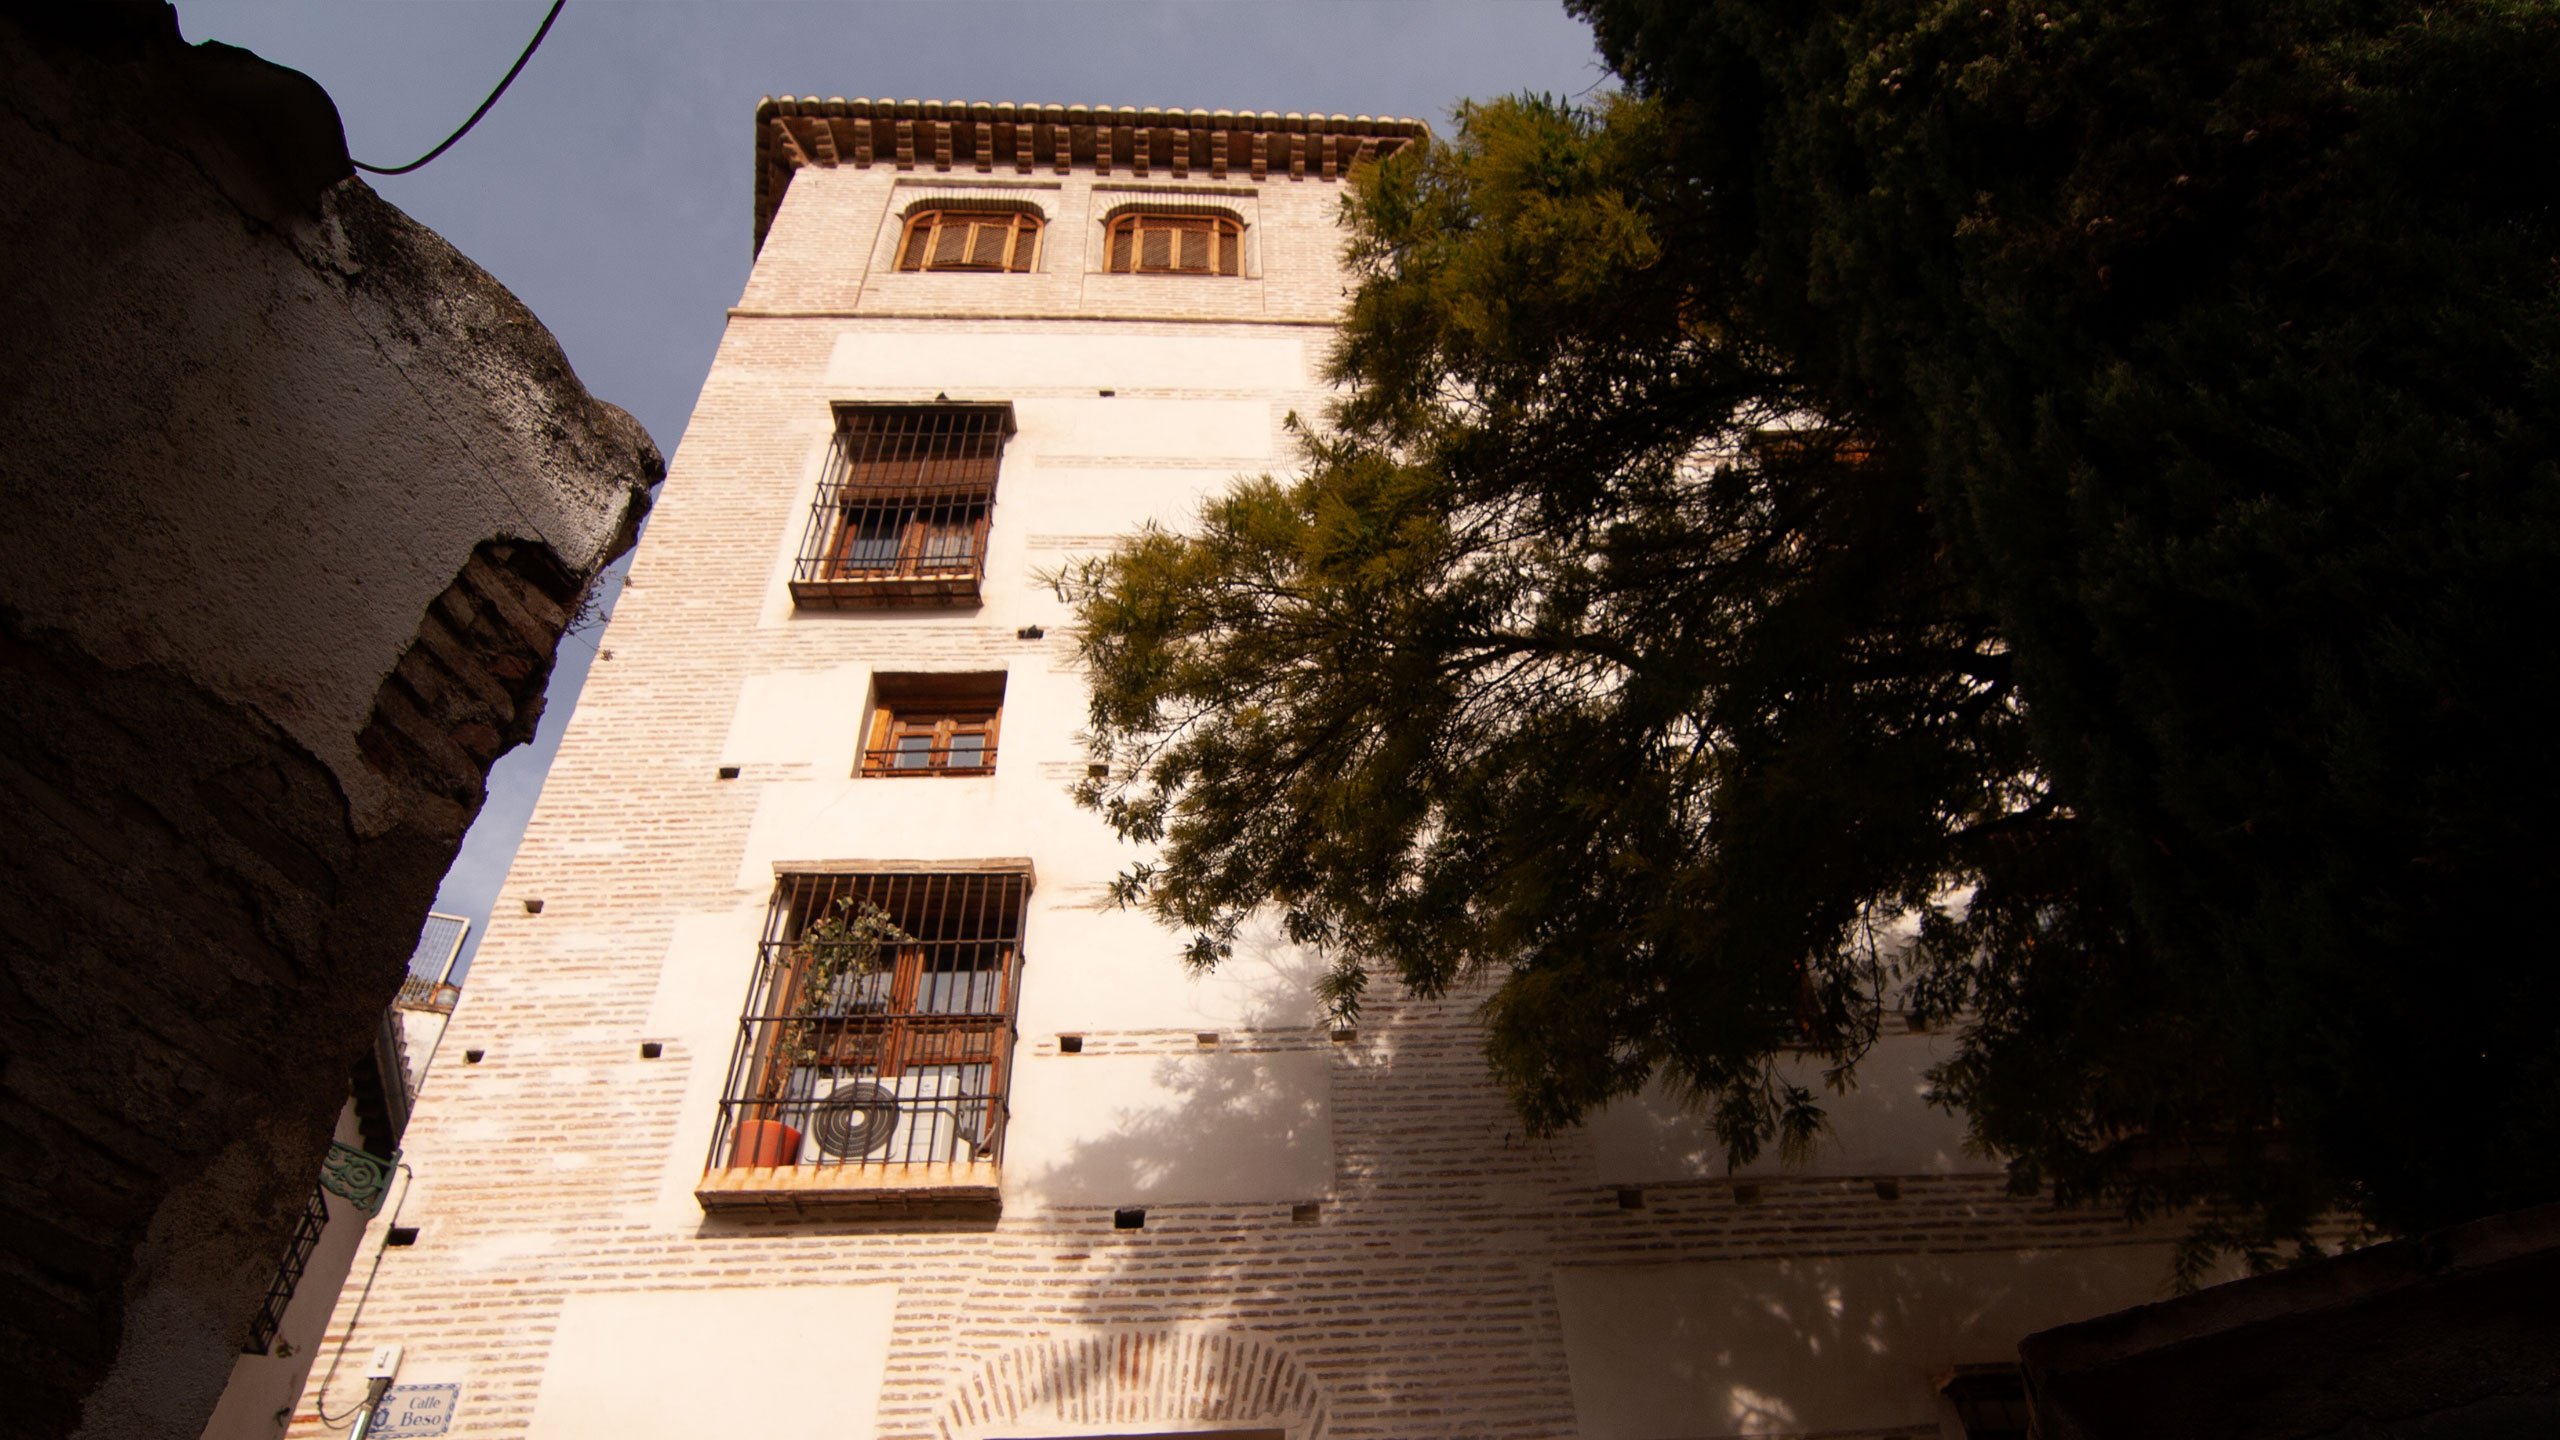 Residential - Conde de Cabra Palace, The tower 